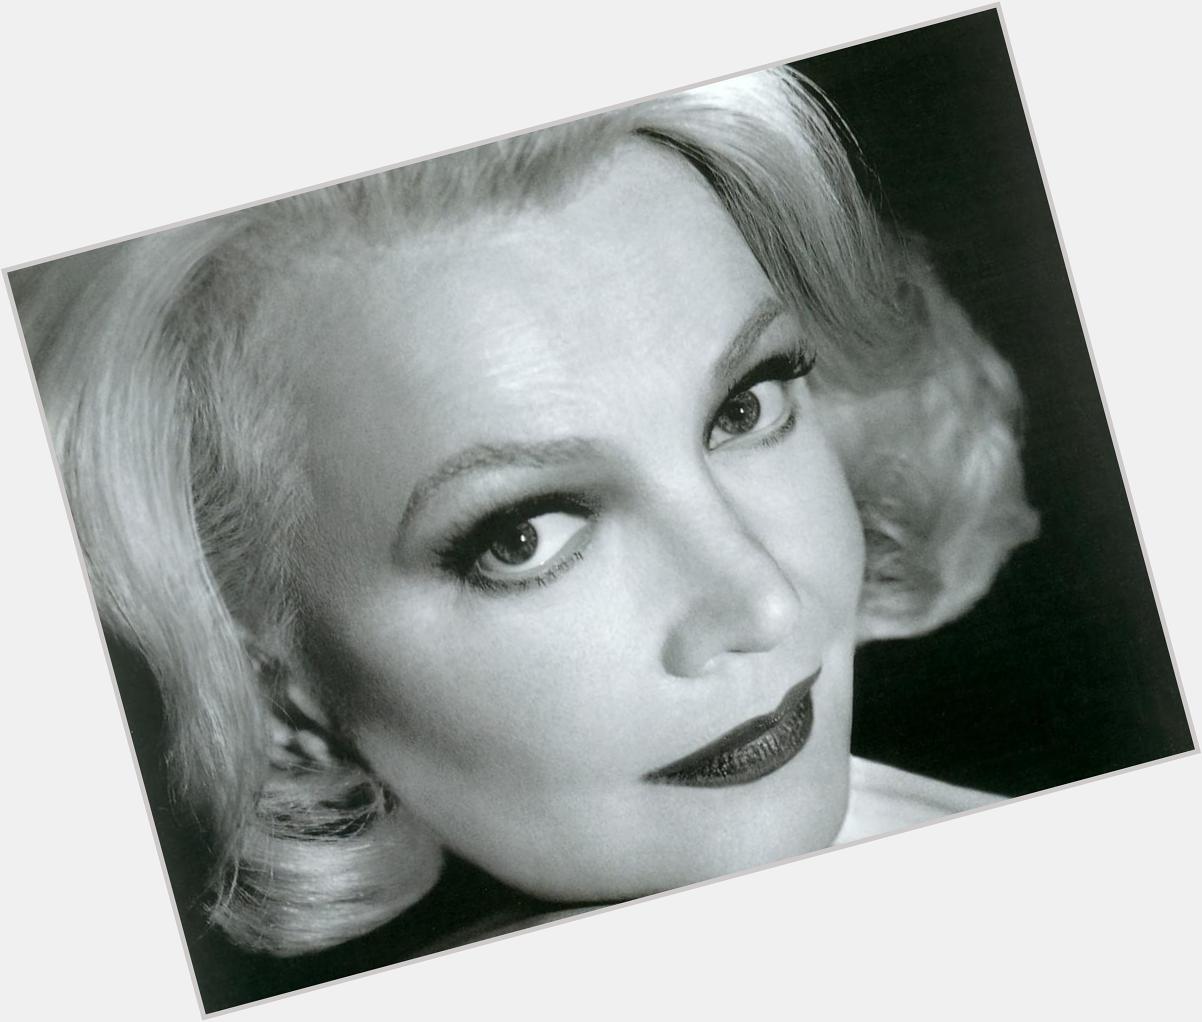 Happy 85th Birthday to one of the greatest American actresses of our times, 2-time Oscar-nominee, Gena Rowlands! 